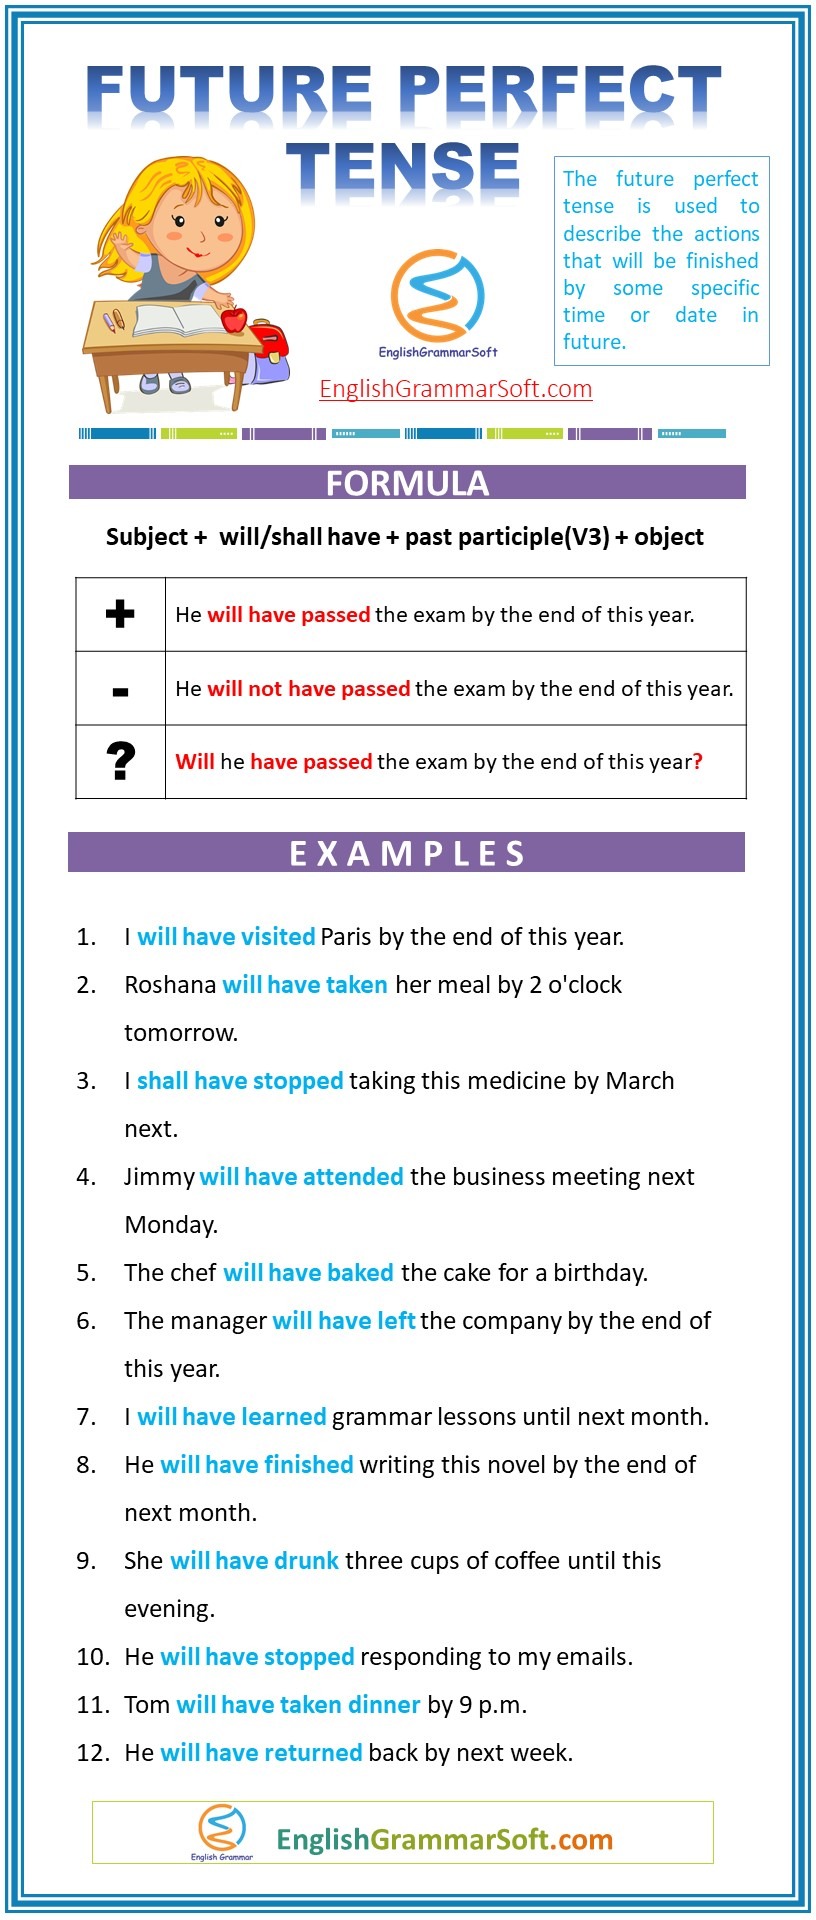 future perfect tense examples